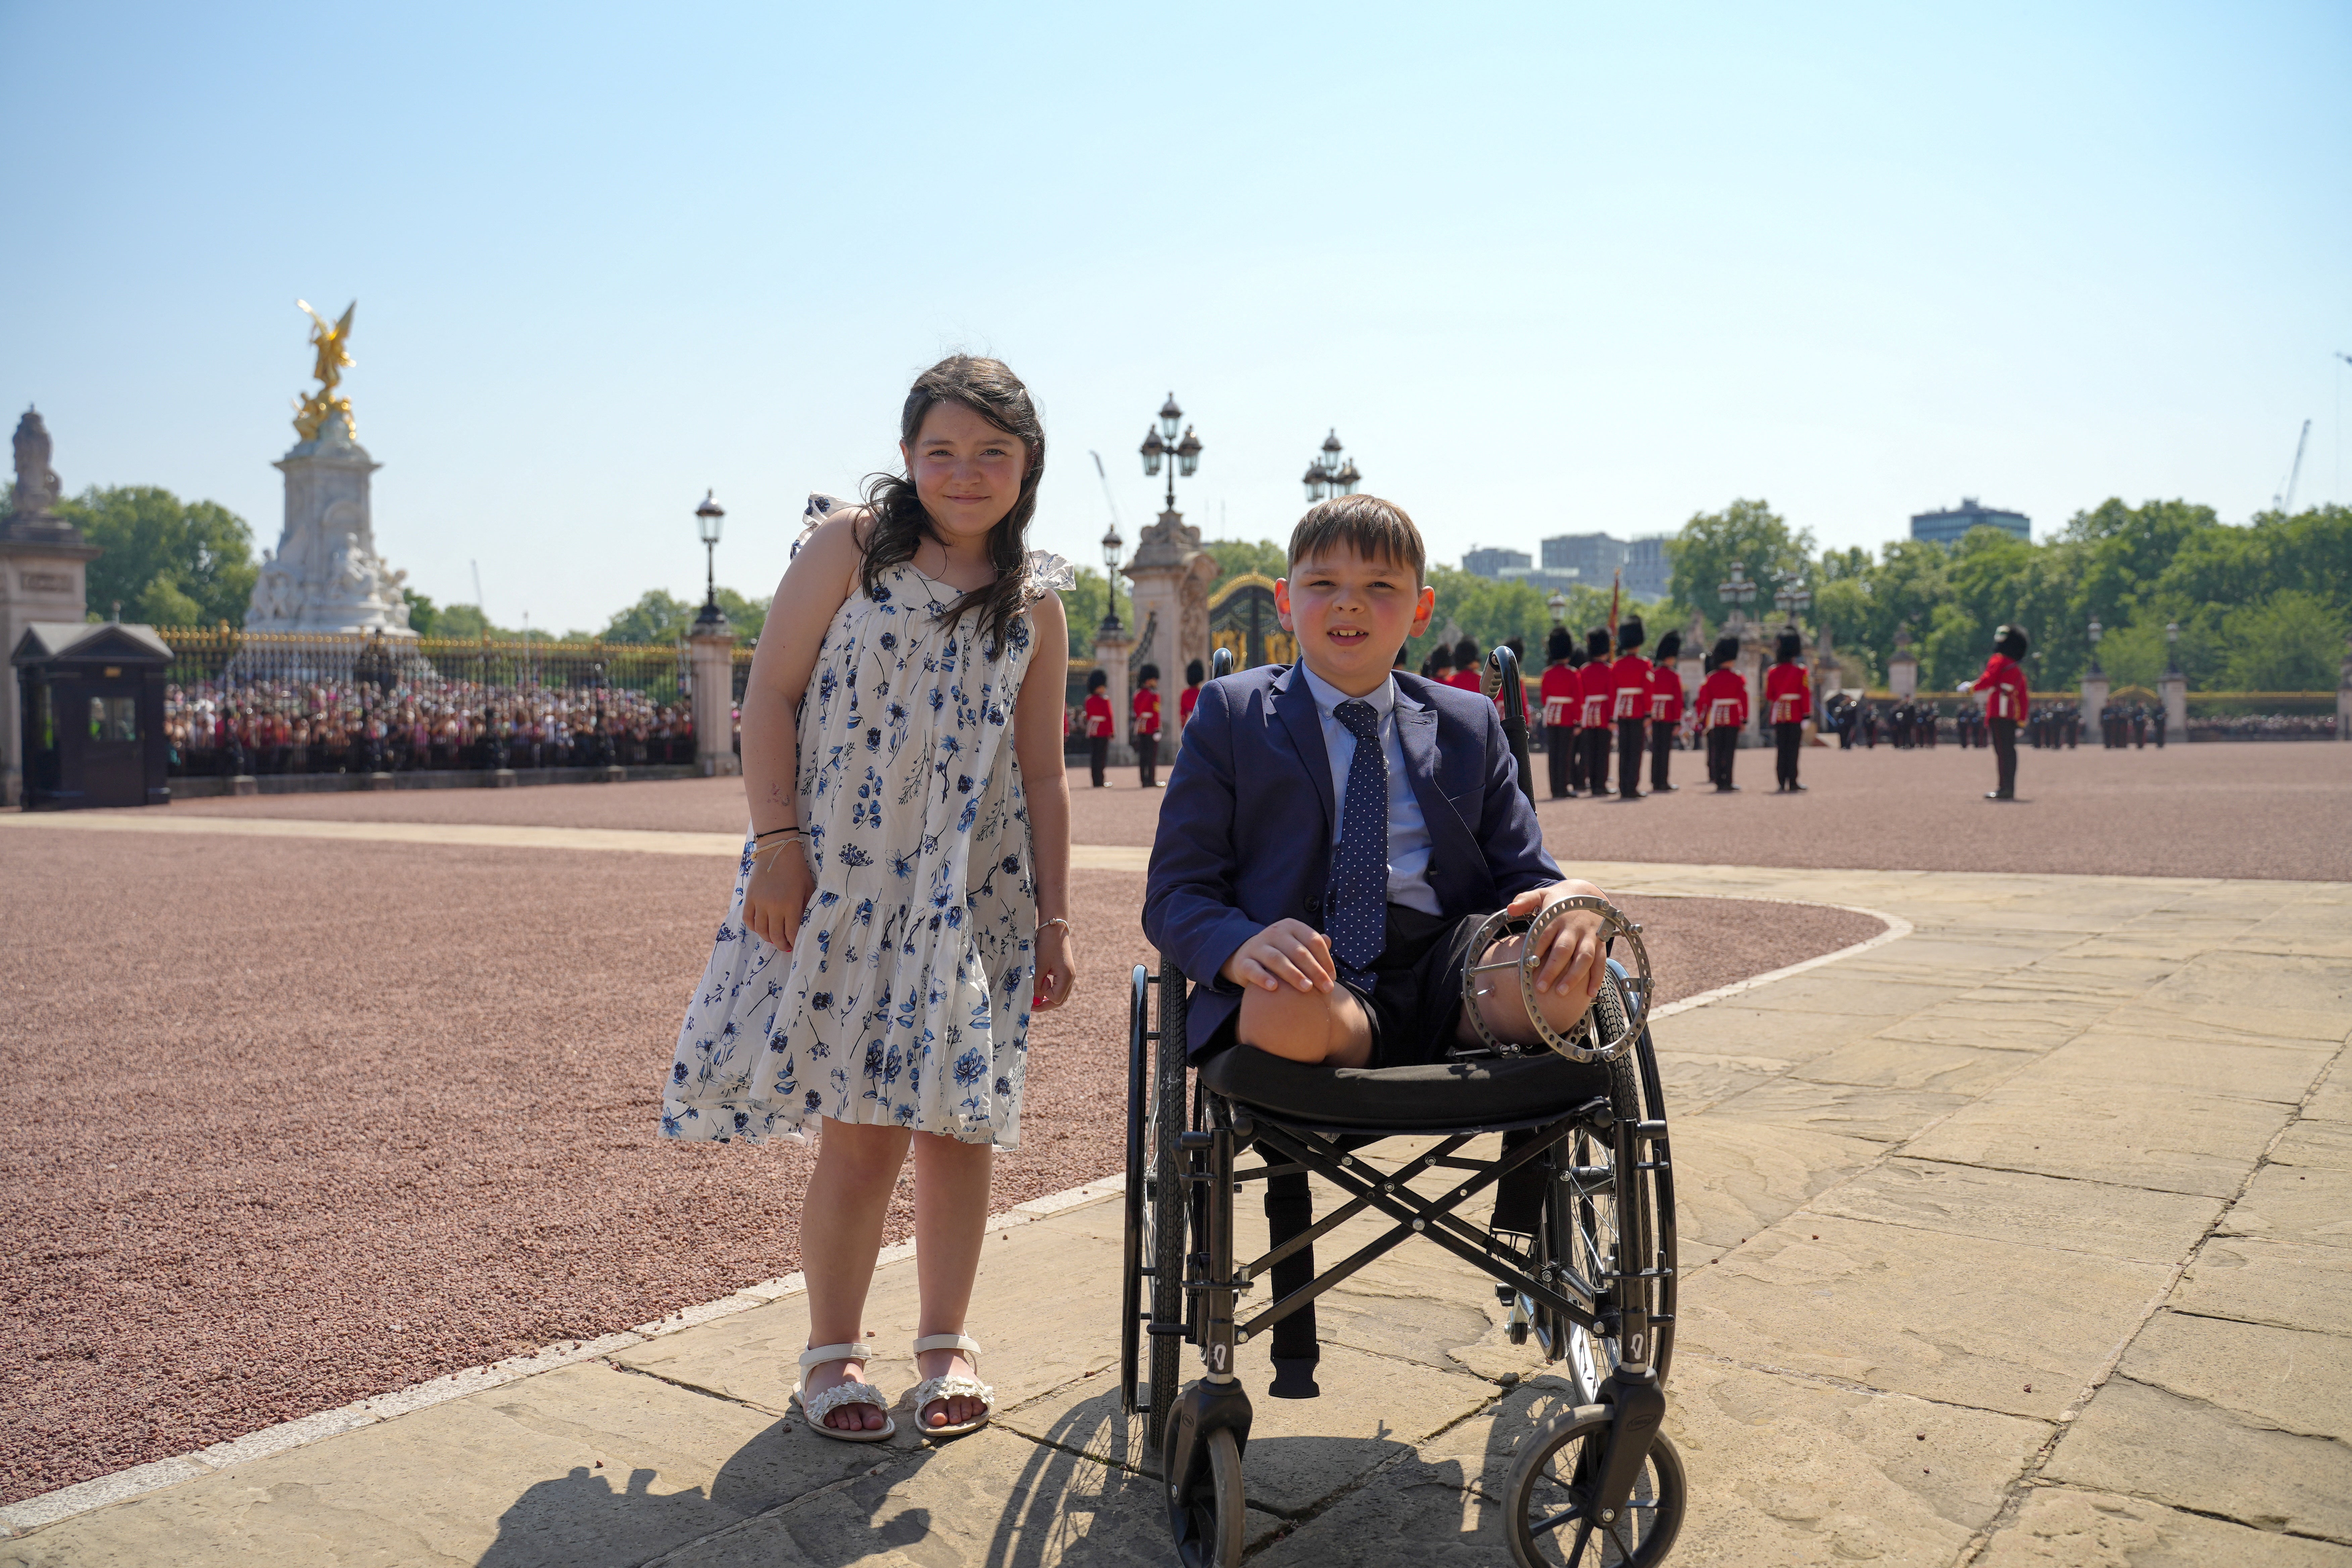 The youngsters watched the Changing of the Guard and enjoyed a private tour.